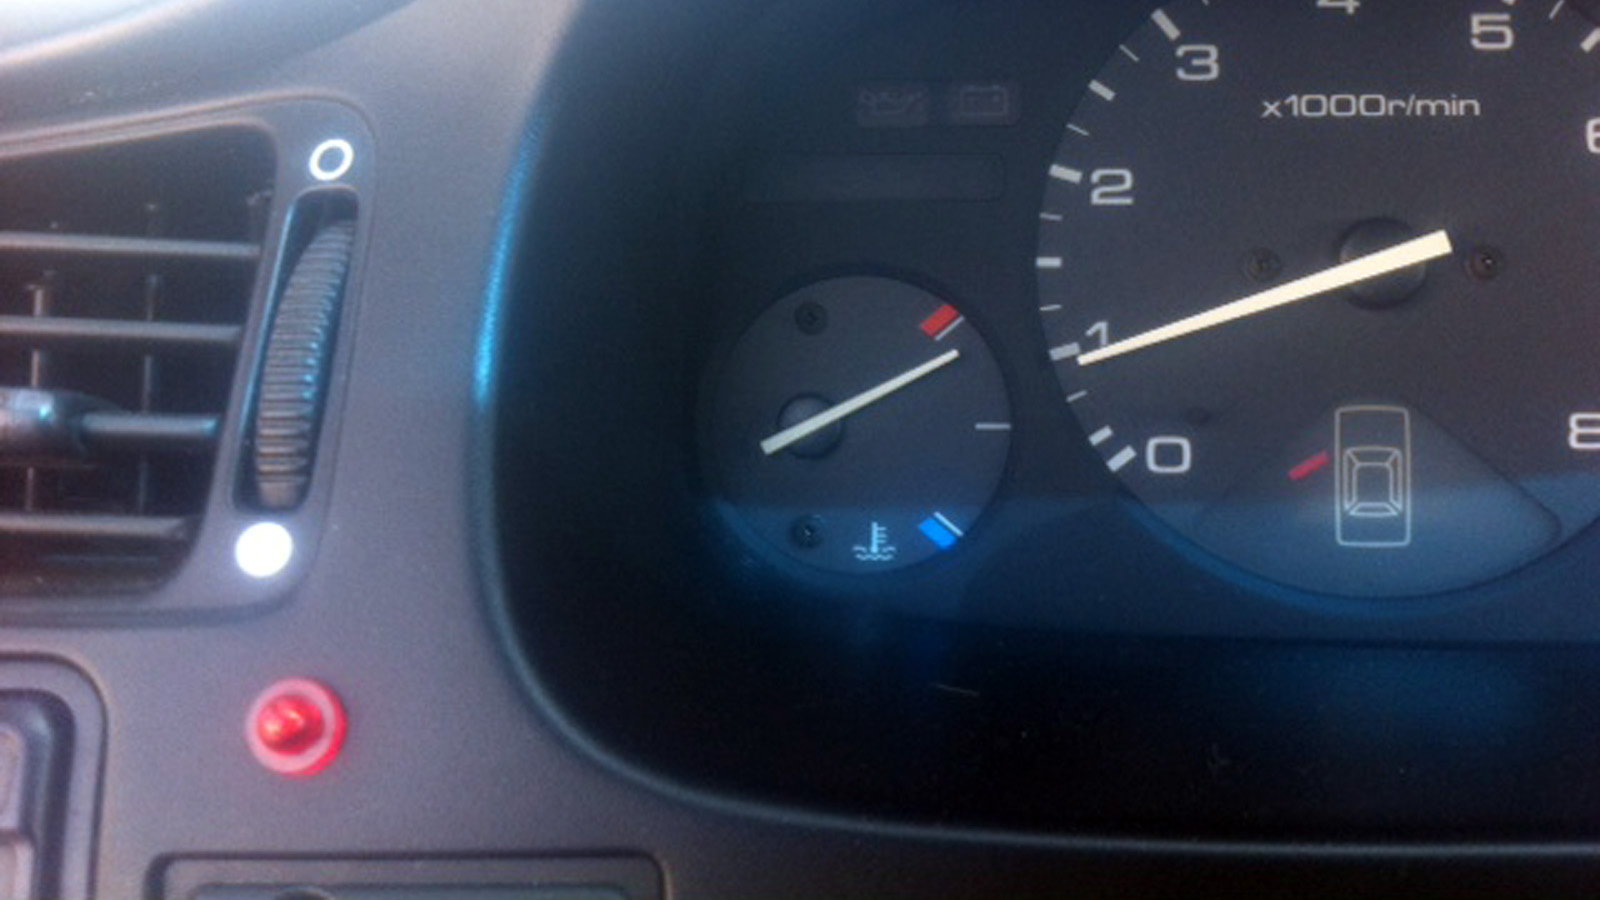 Honda Civic: Why is My Temperature Gauge Not Working Correctly? | Honda 2002 Honda Accord Temperature Gauge Not Working